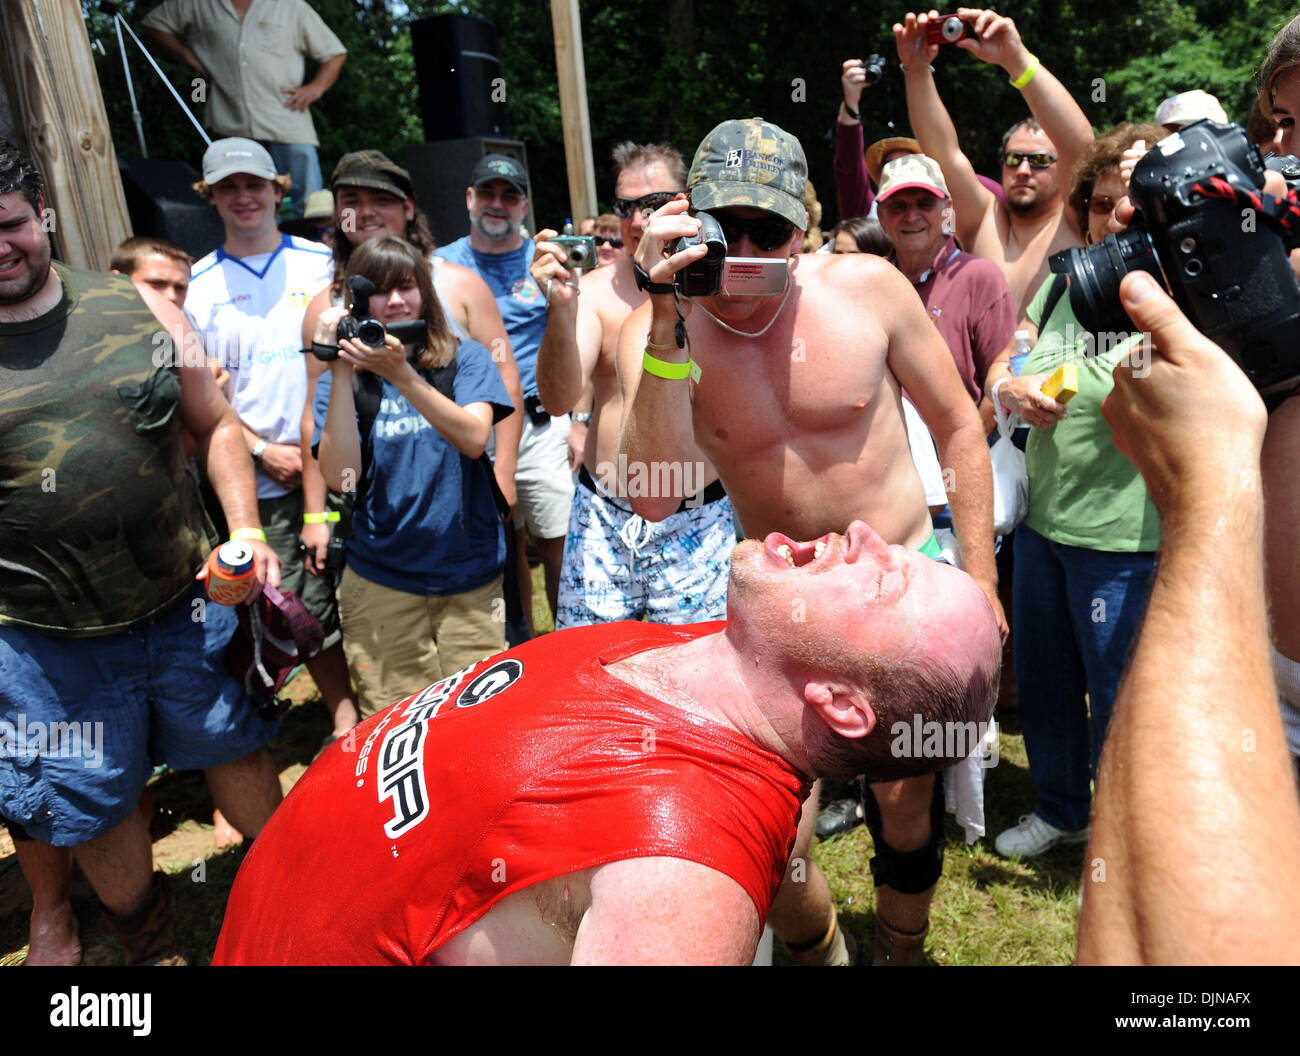 Mar 11, 2008 - East Dublin, Georgia, USA - Bobbing for Pigs Feet winner Eric Outler celebrates his victory during the 13th annual Summer Redneck Games at Buckeye Park in East Dublin, Georgia, on Saturday. The annual homage to Southerners, began as a spoof to the 1996 Summer Olympics in Atlanta. Thousands of revelers attend the event whose events include bobbing for pigs feet, the m Stock Photo